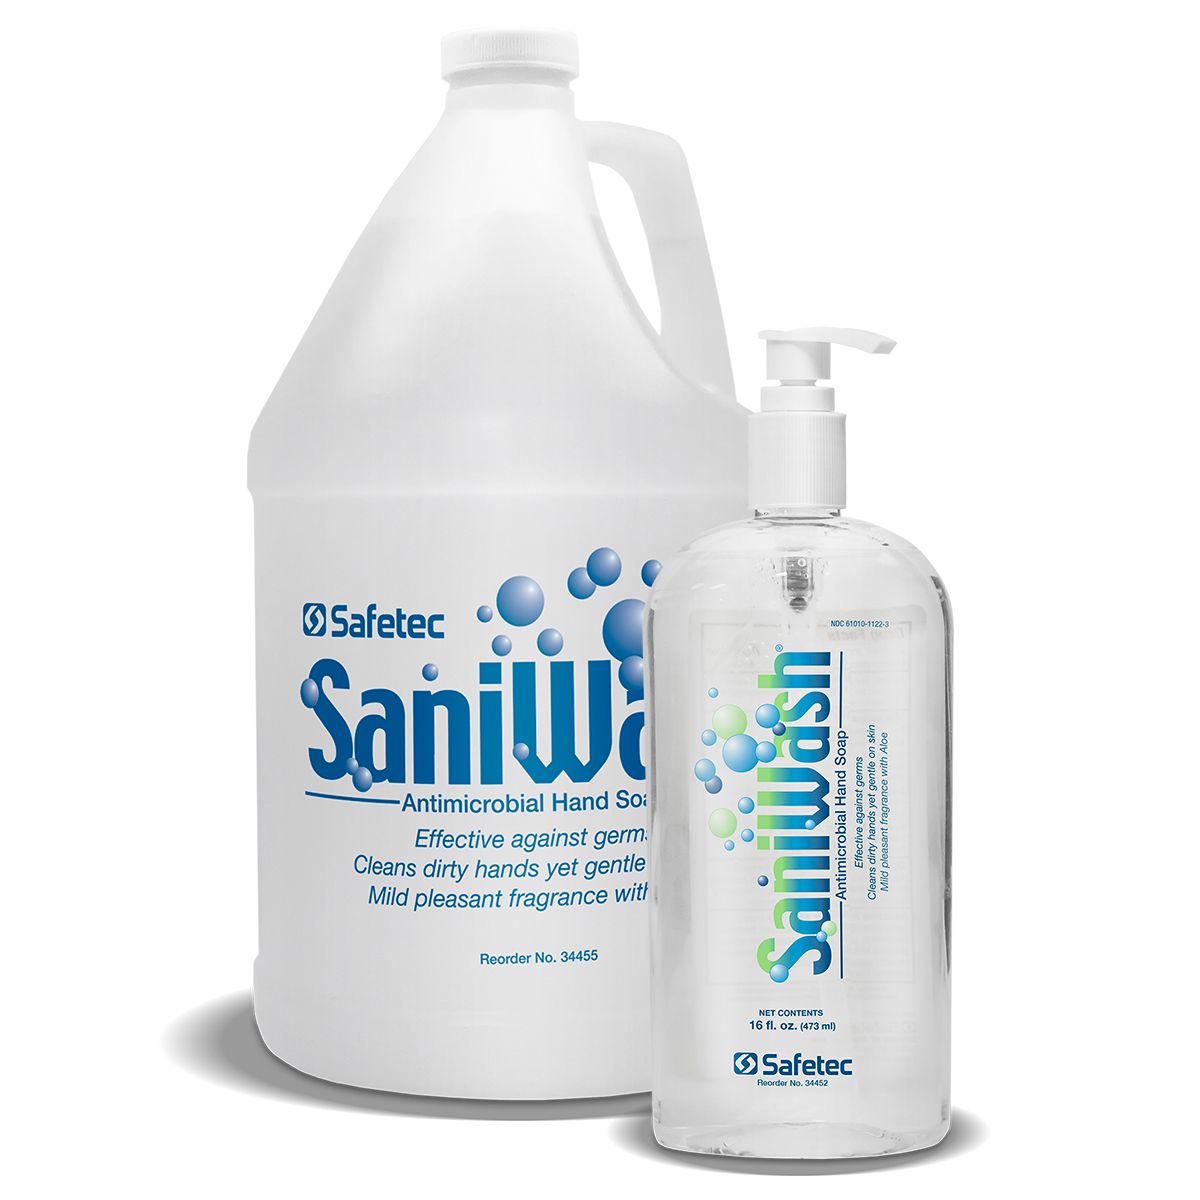 34452 and 34455 Safetec® SaniWash® Antimicrobial Hand Soap (16oz and 1 gallon)